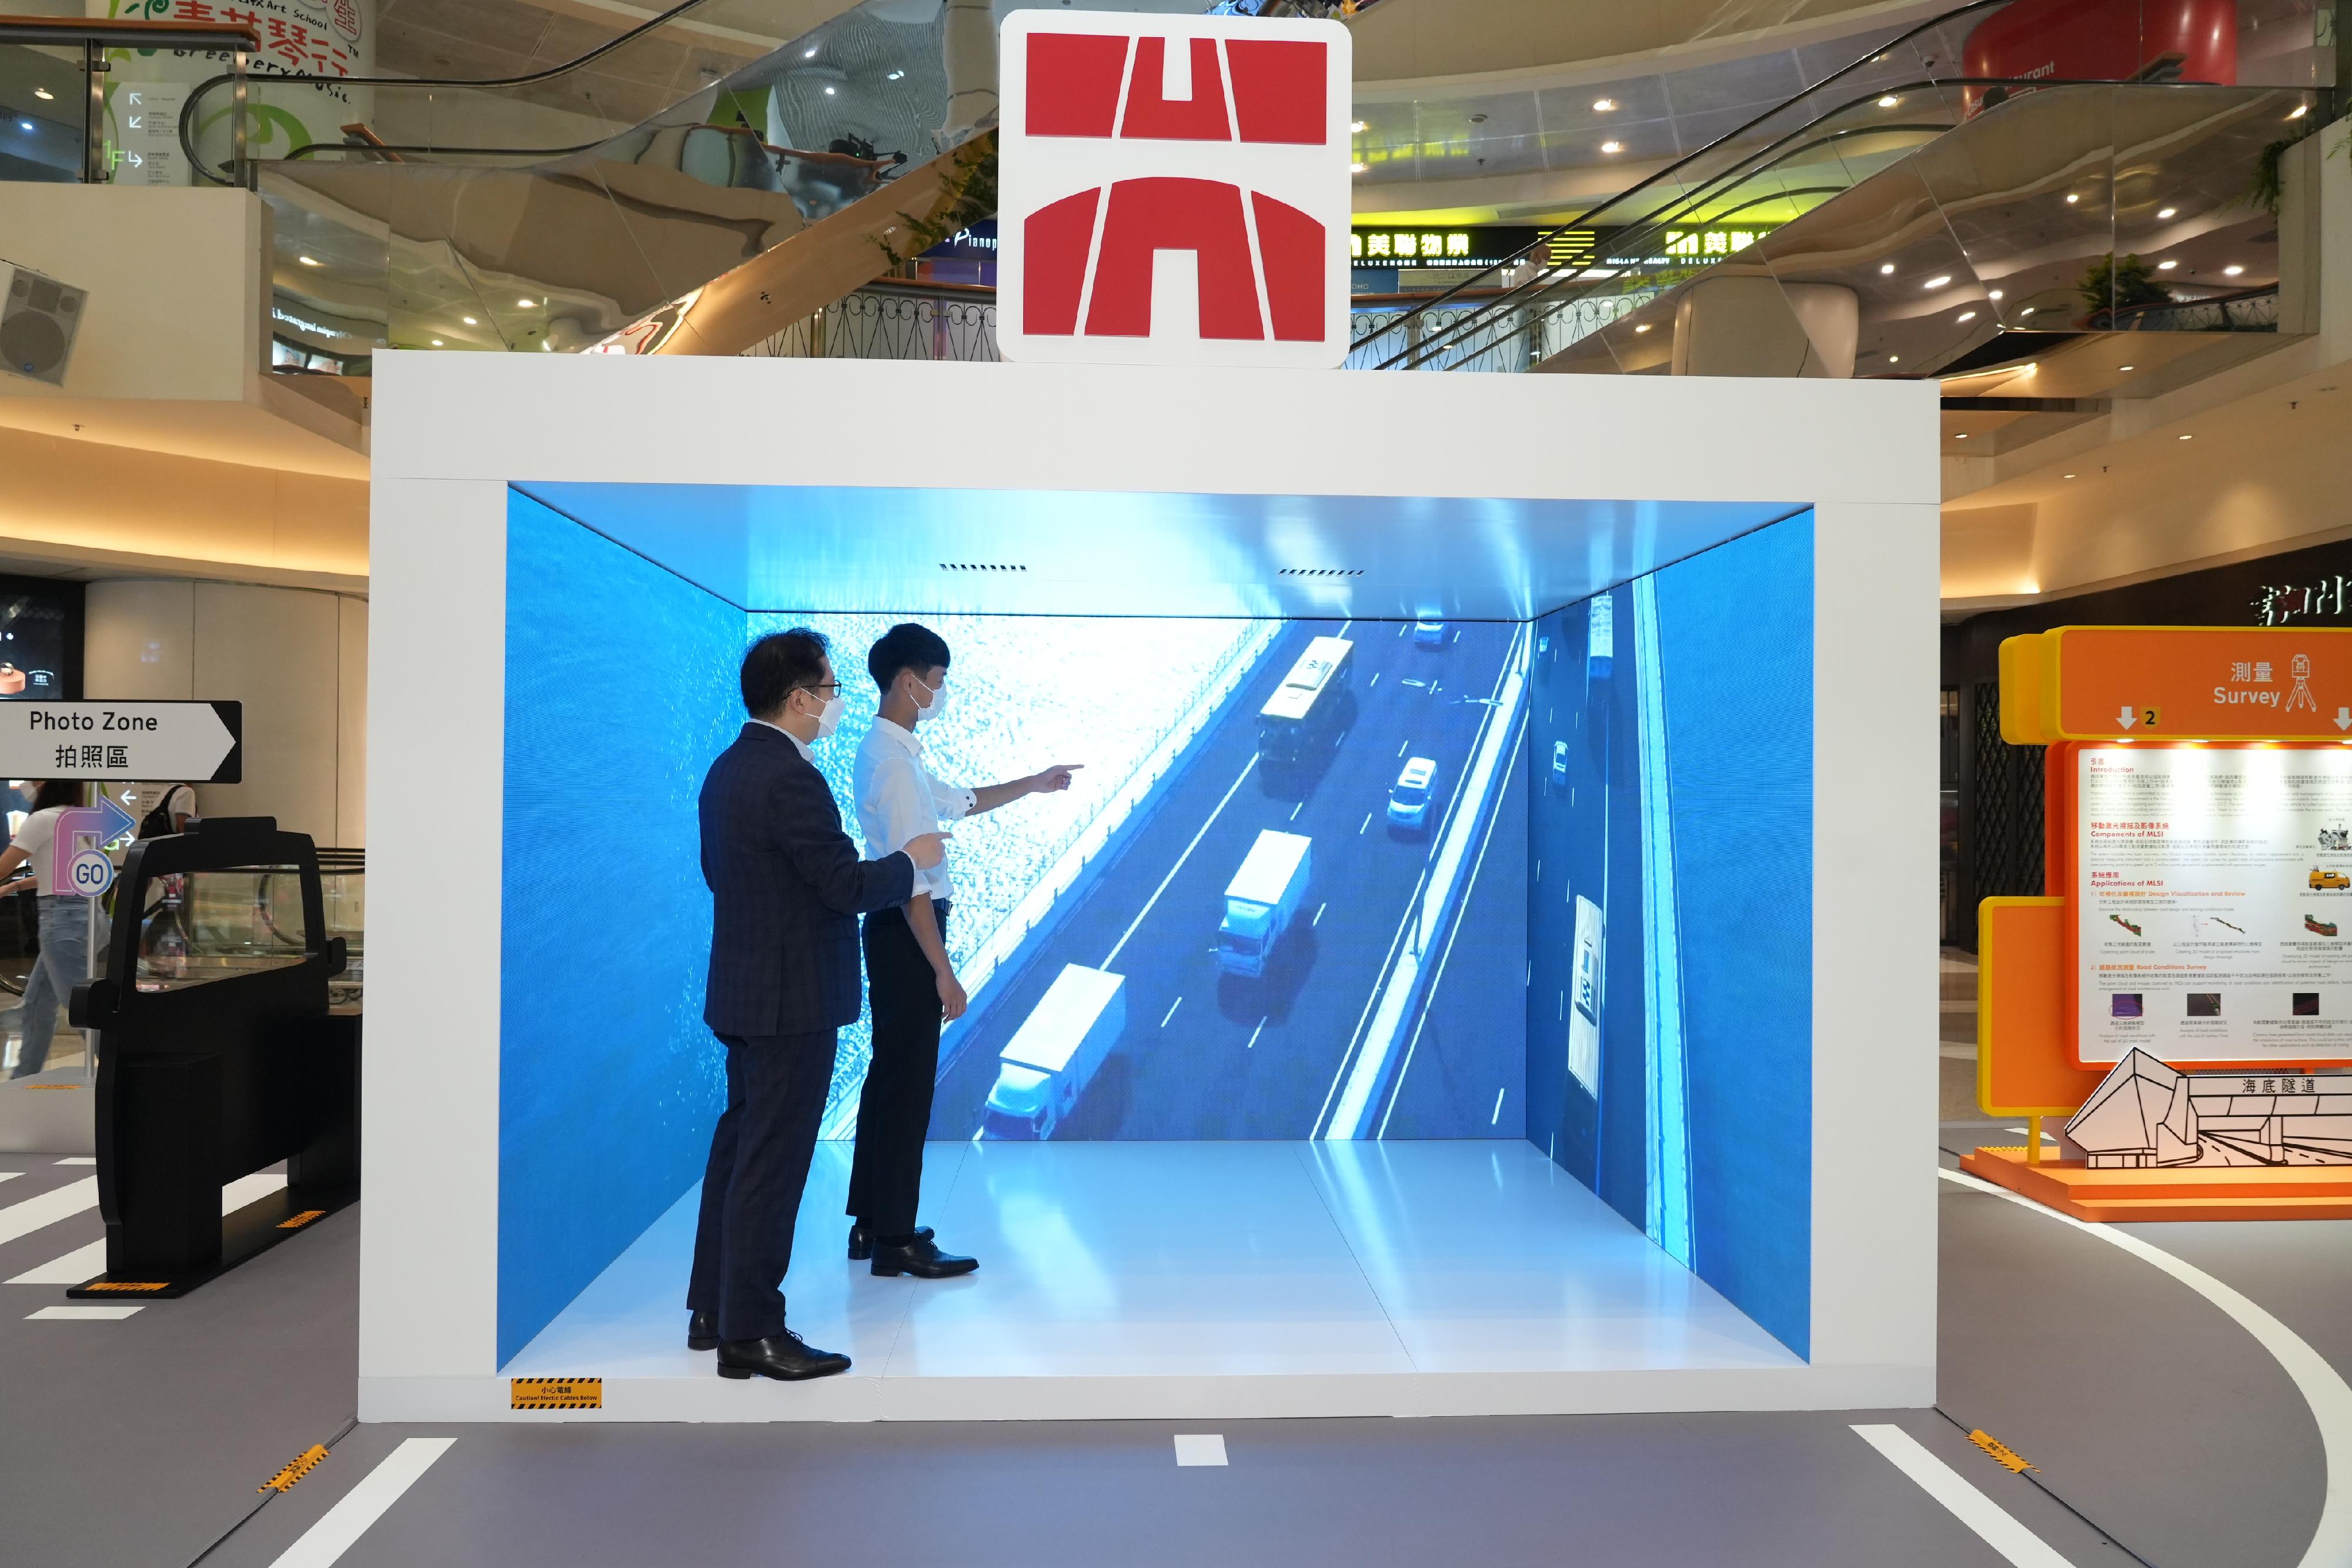 The Highways Department is holding the "Building and Maintaining Highway Infrastructure through Innovation in Highways Department" exhibition from today (August 12) to August 21. The 270-degree panoramic view "Immersive Hall" offers a first-hand and fully immersive experience for visitors to understand more about the planning, design, construction and maintenance of Hong Kong's public road network.
